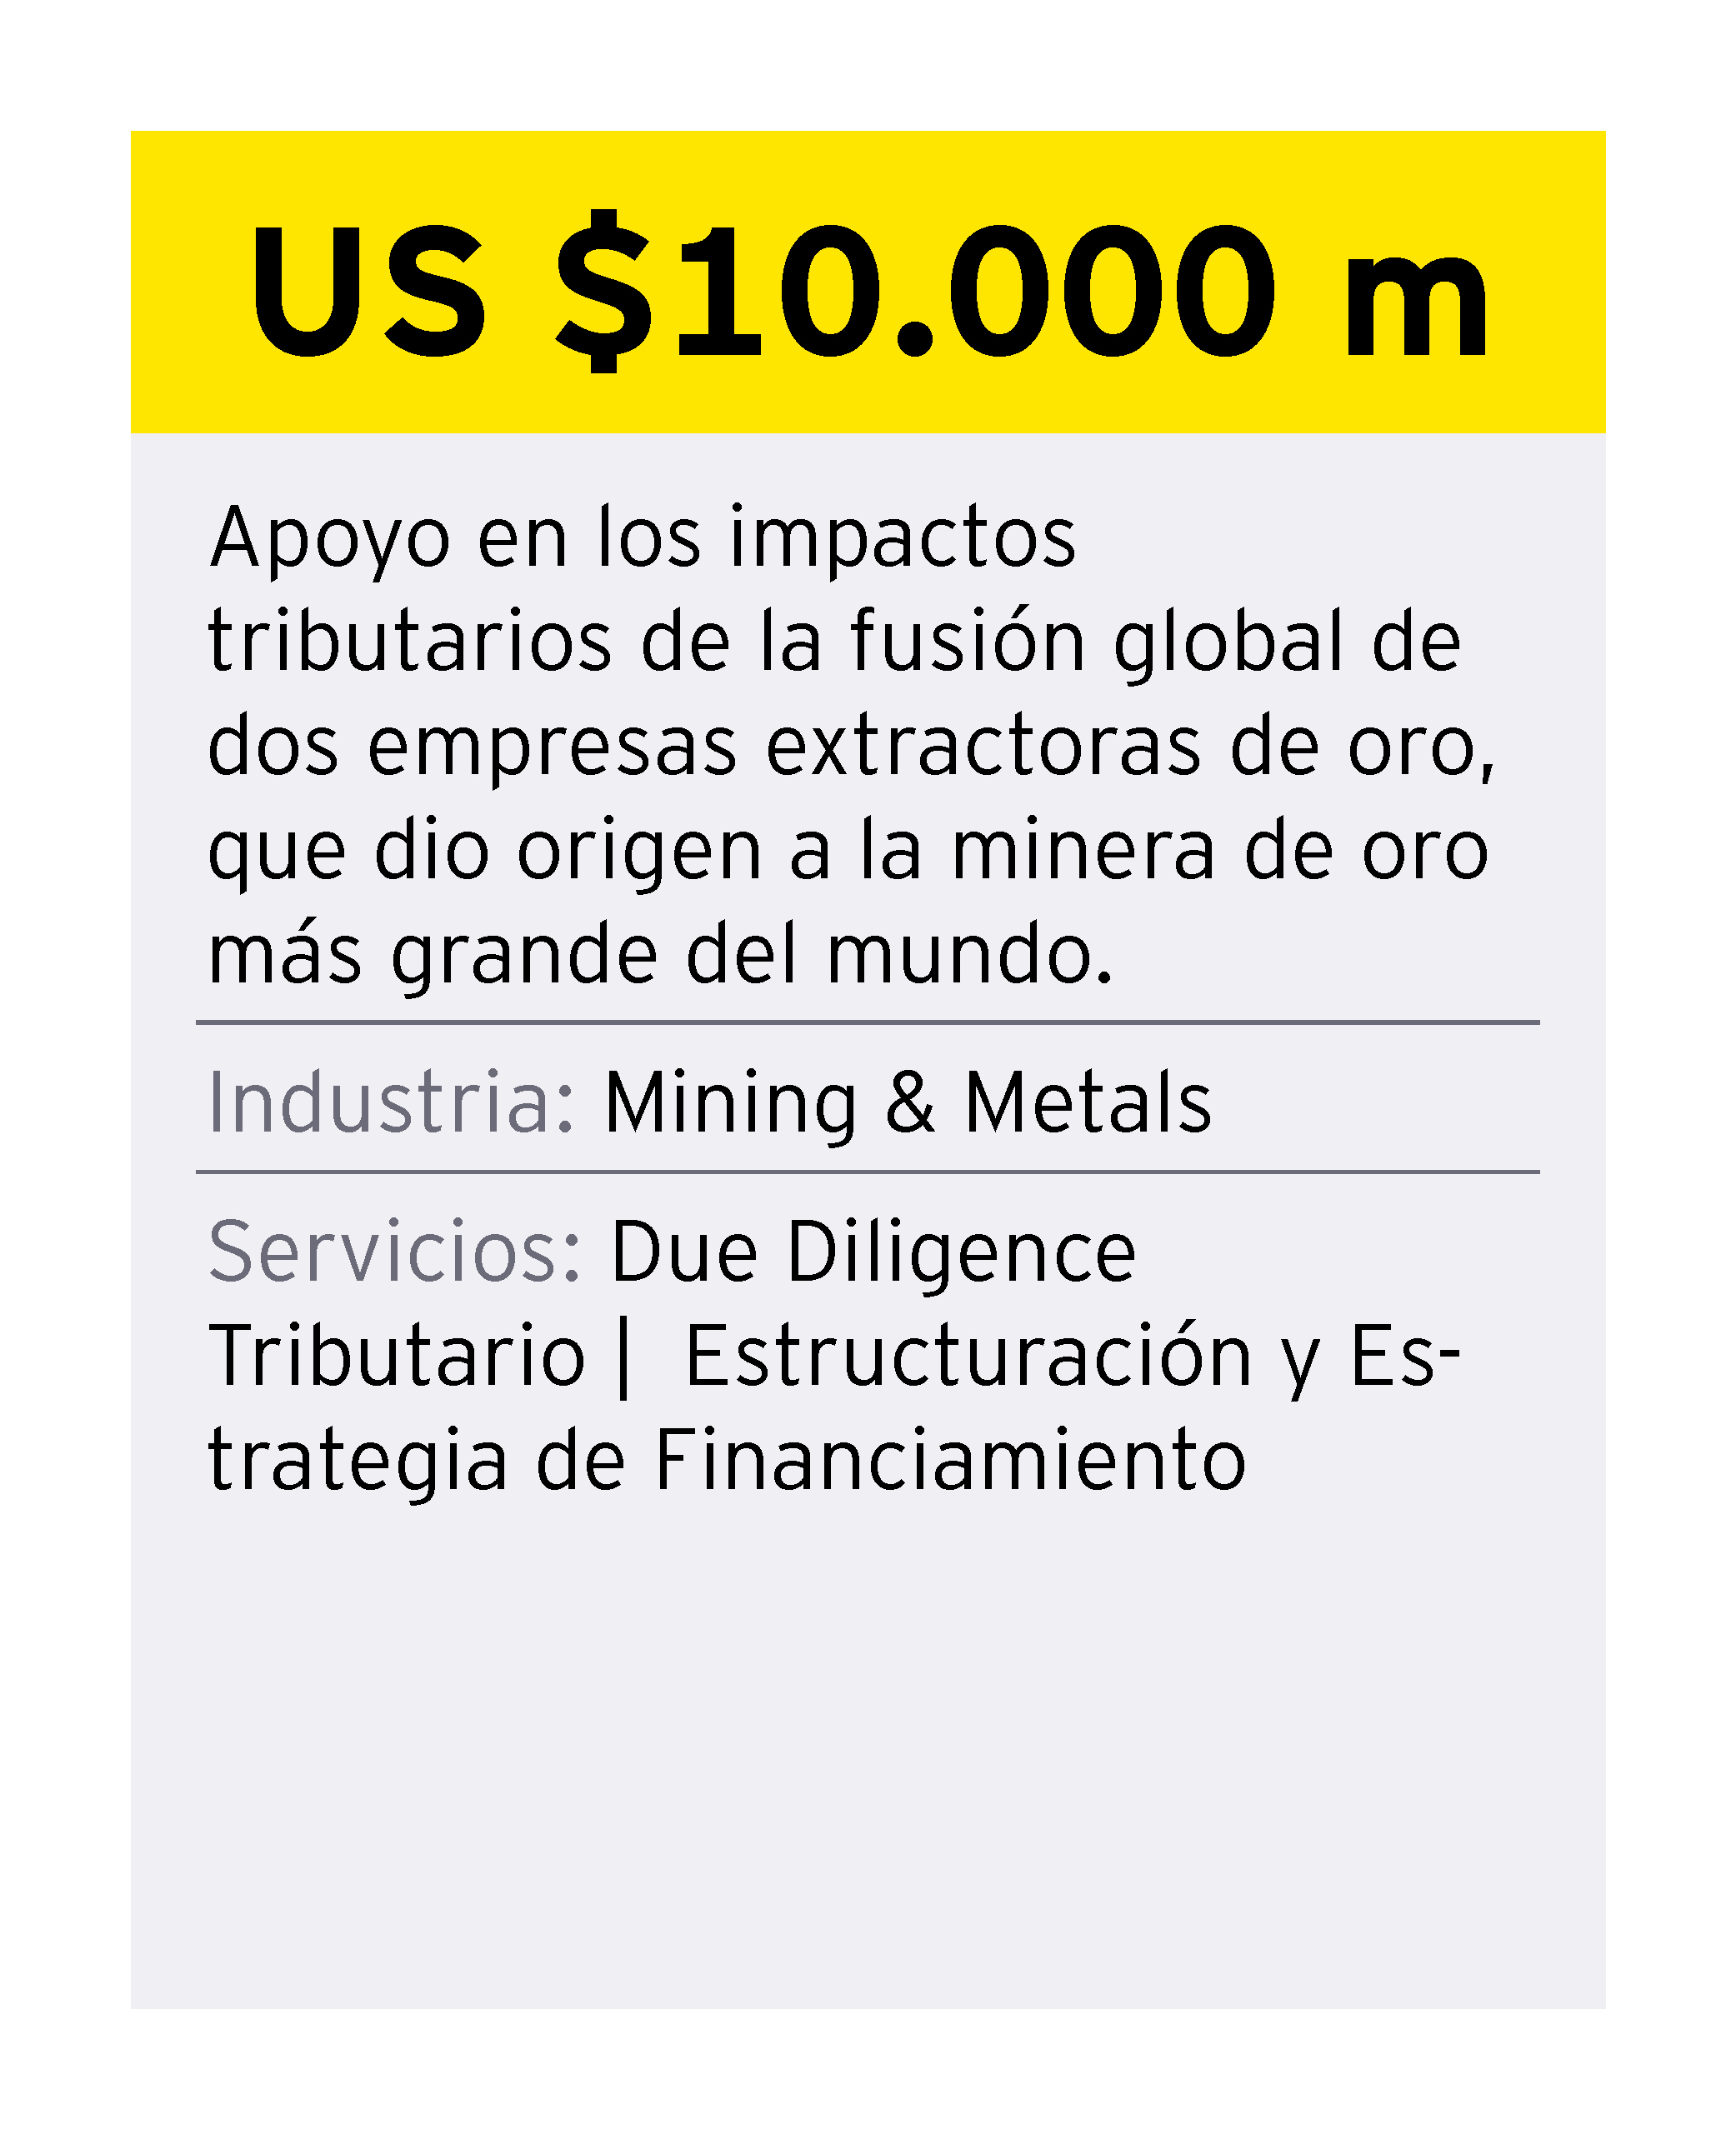 ey-chile-credencial-4-mining-and-metals